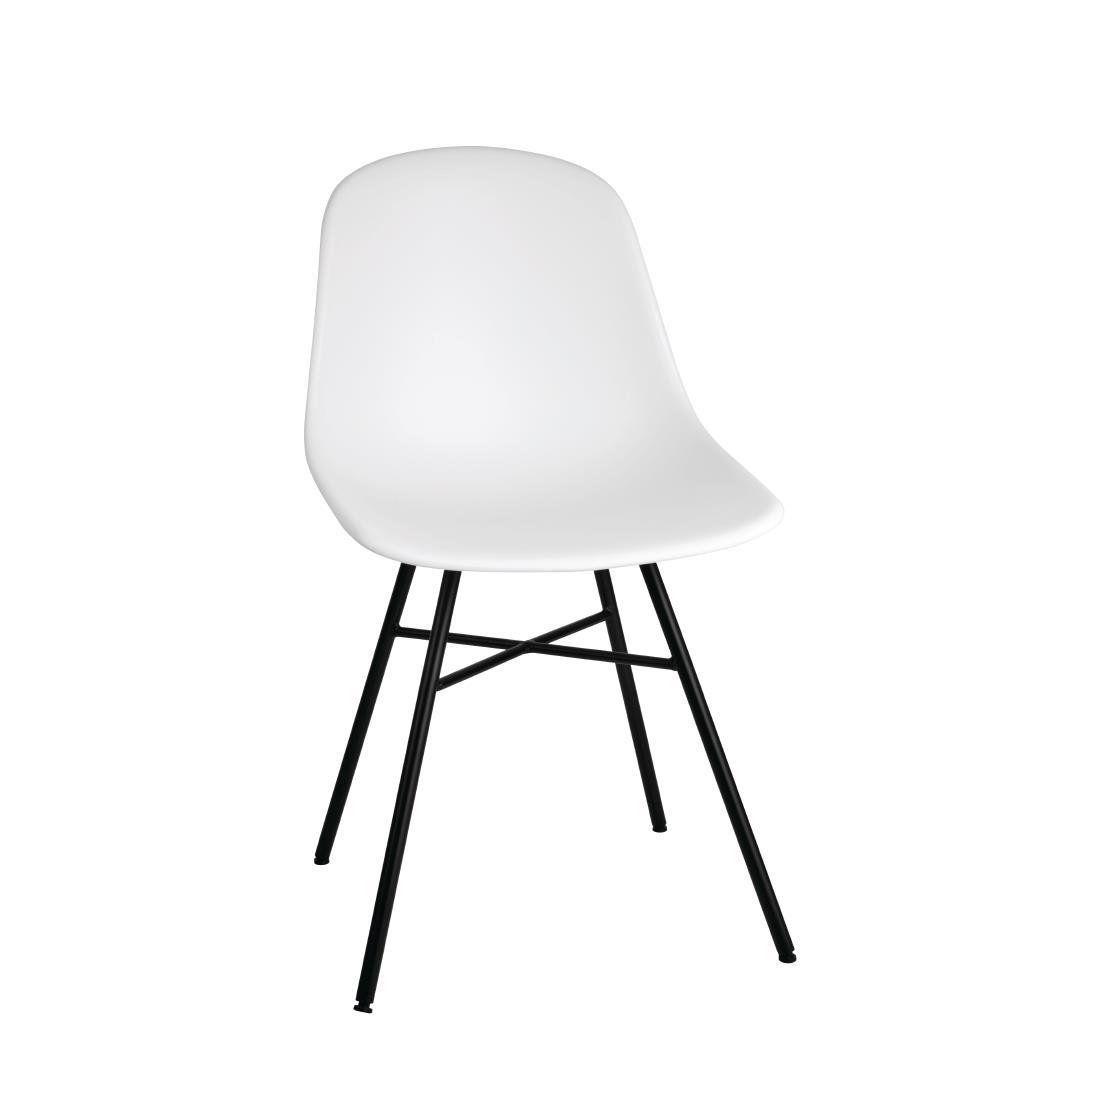 Bolero Arlo Side Chairs with Metal Frame White (Pack of 2) - DY348  - 1